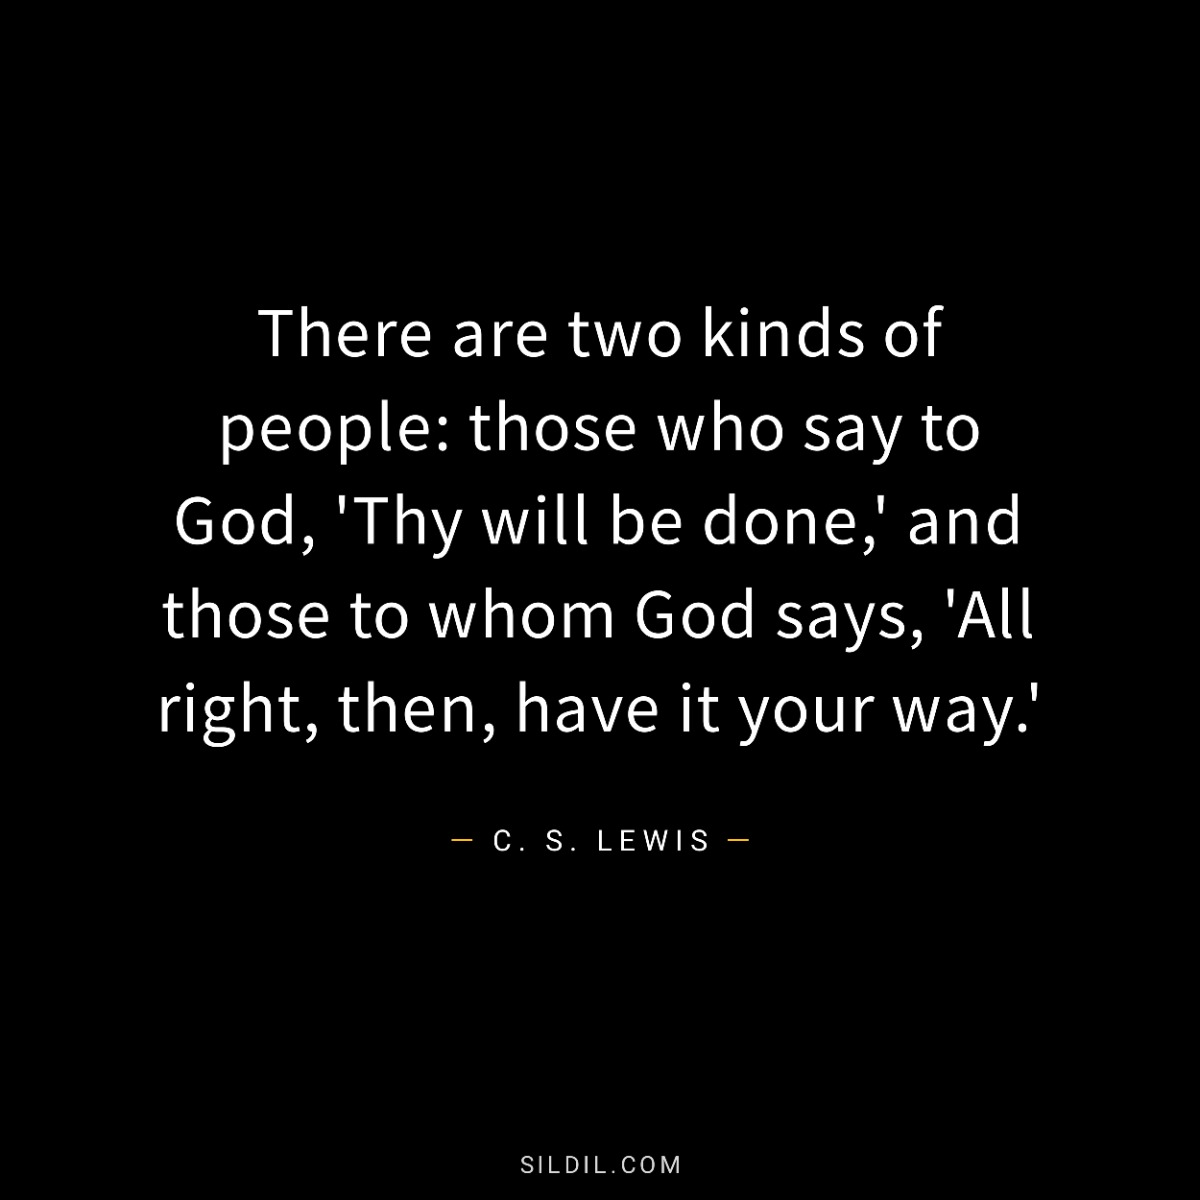 There are two kinds of people: those who say to God, 'Thy will be done,' and those to whom God says, 'All right, then, have it your way.'